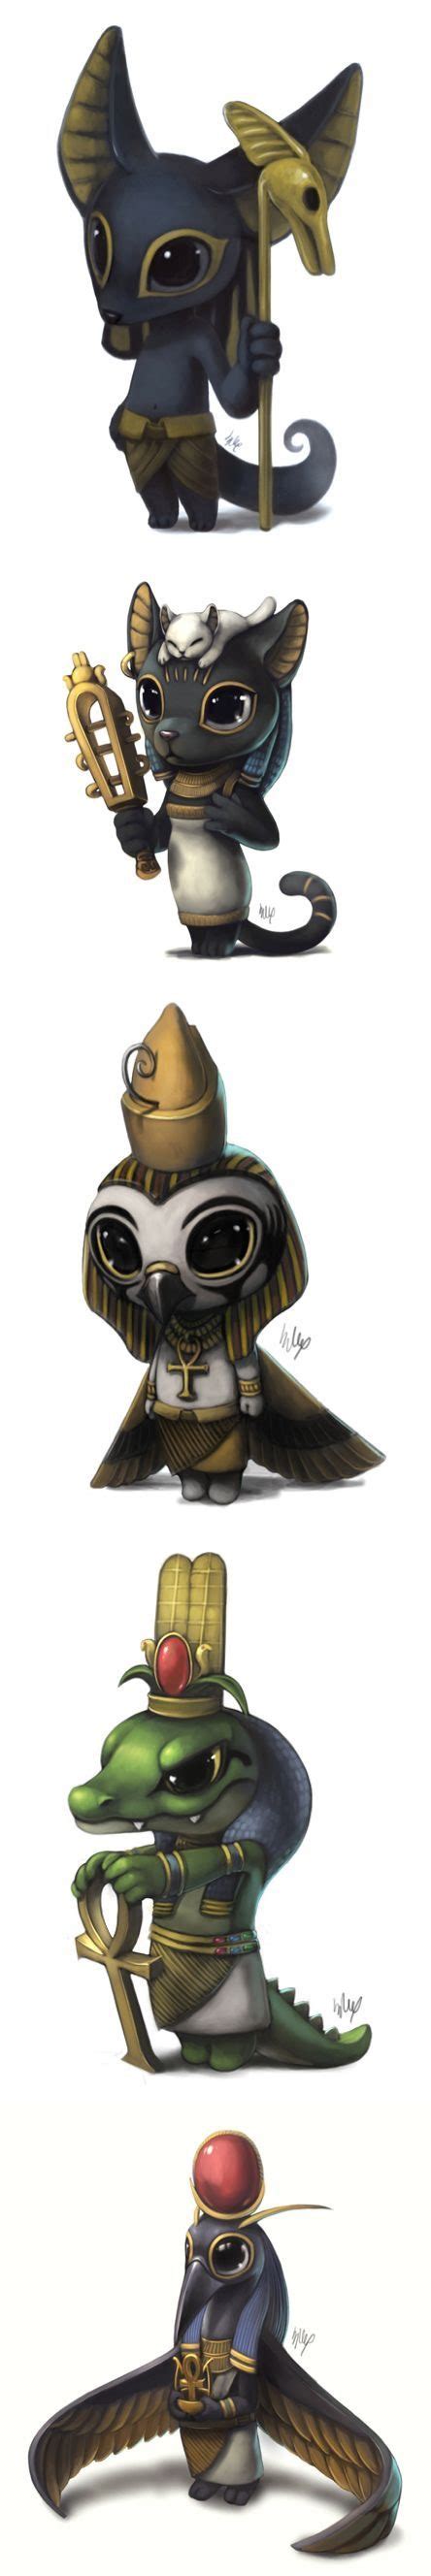 Pin By Ashleigh Cominelli On Chibi Egyptian Gods Art